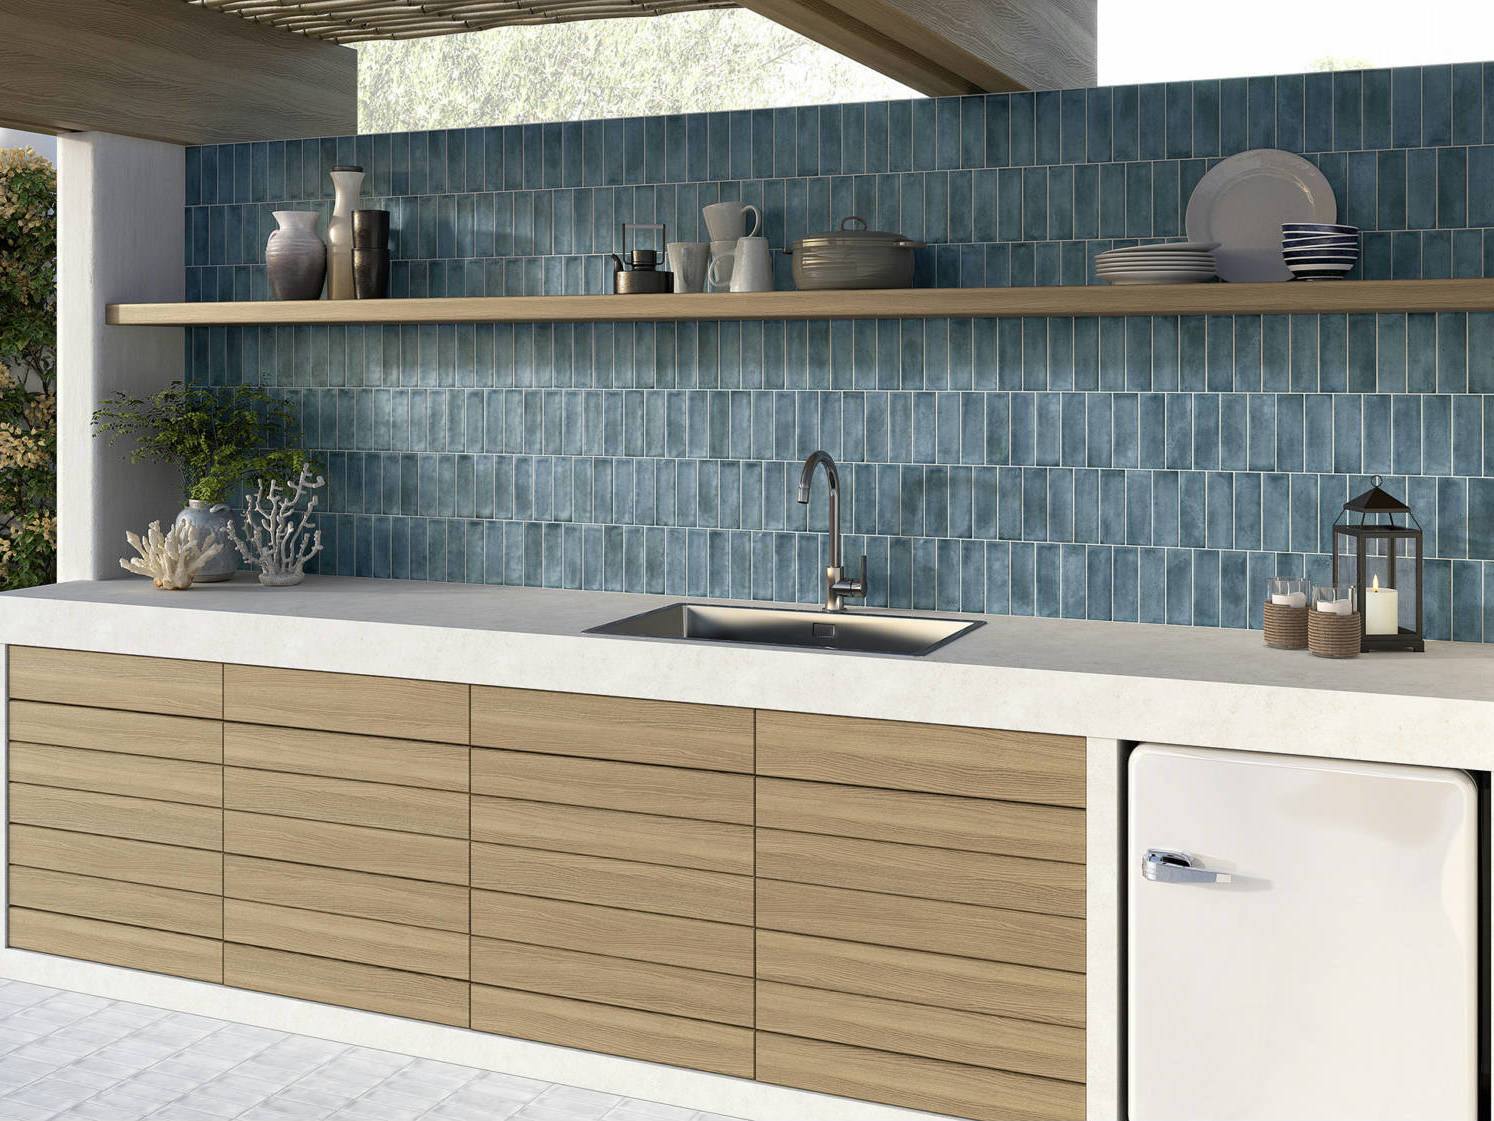 Lisbon 2X6 Blue | Qualis Ceramica | Luxury Tile and Vinyl at affordable prices